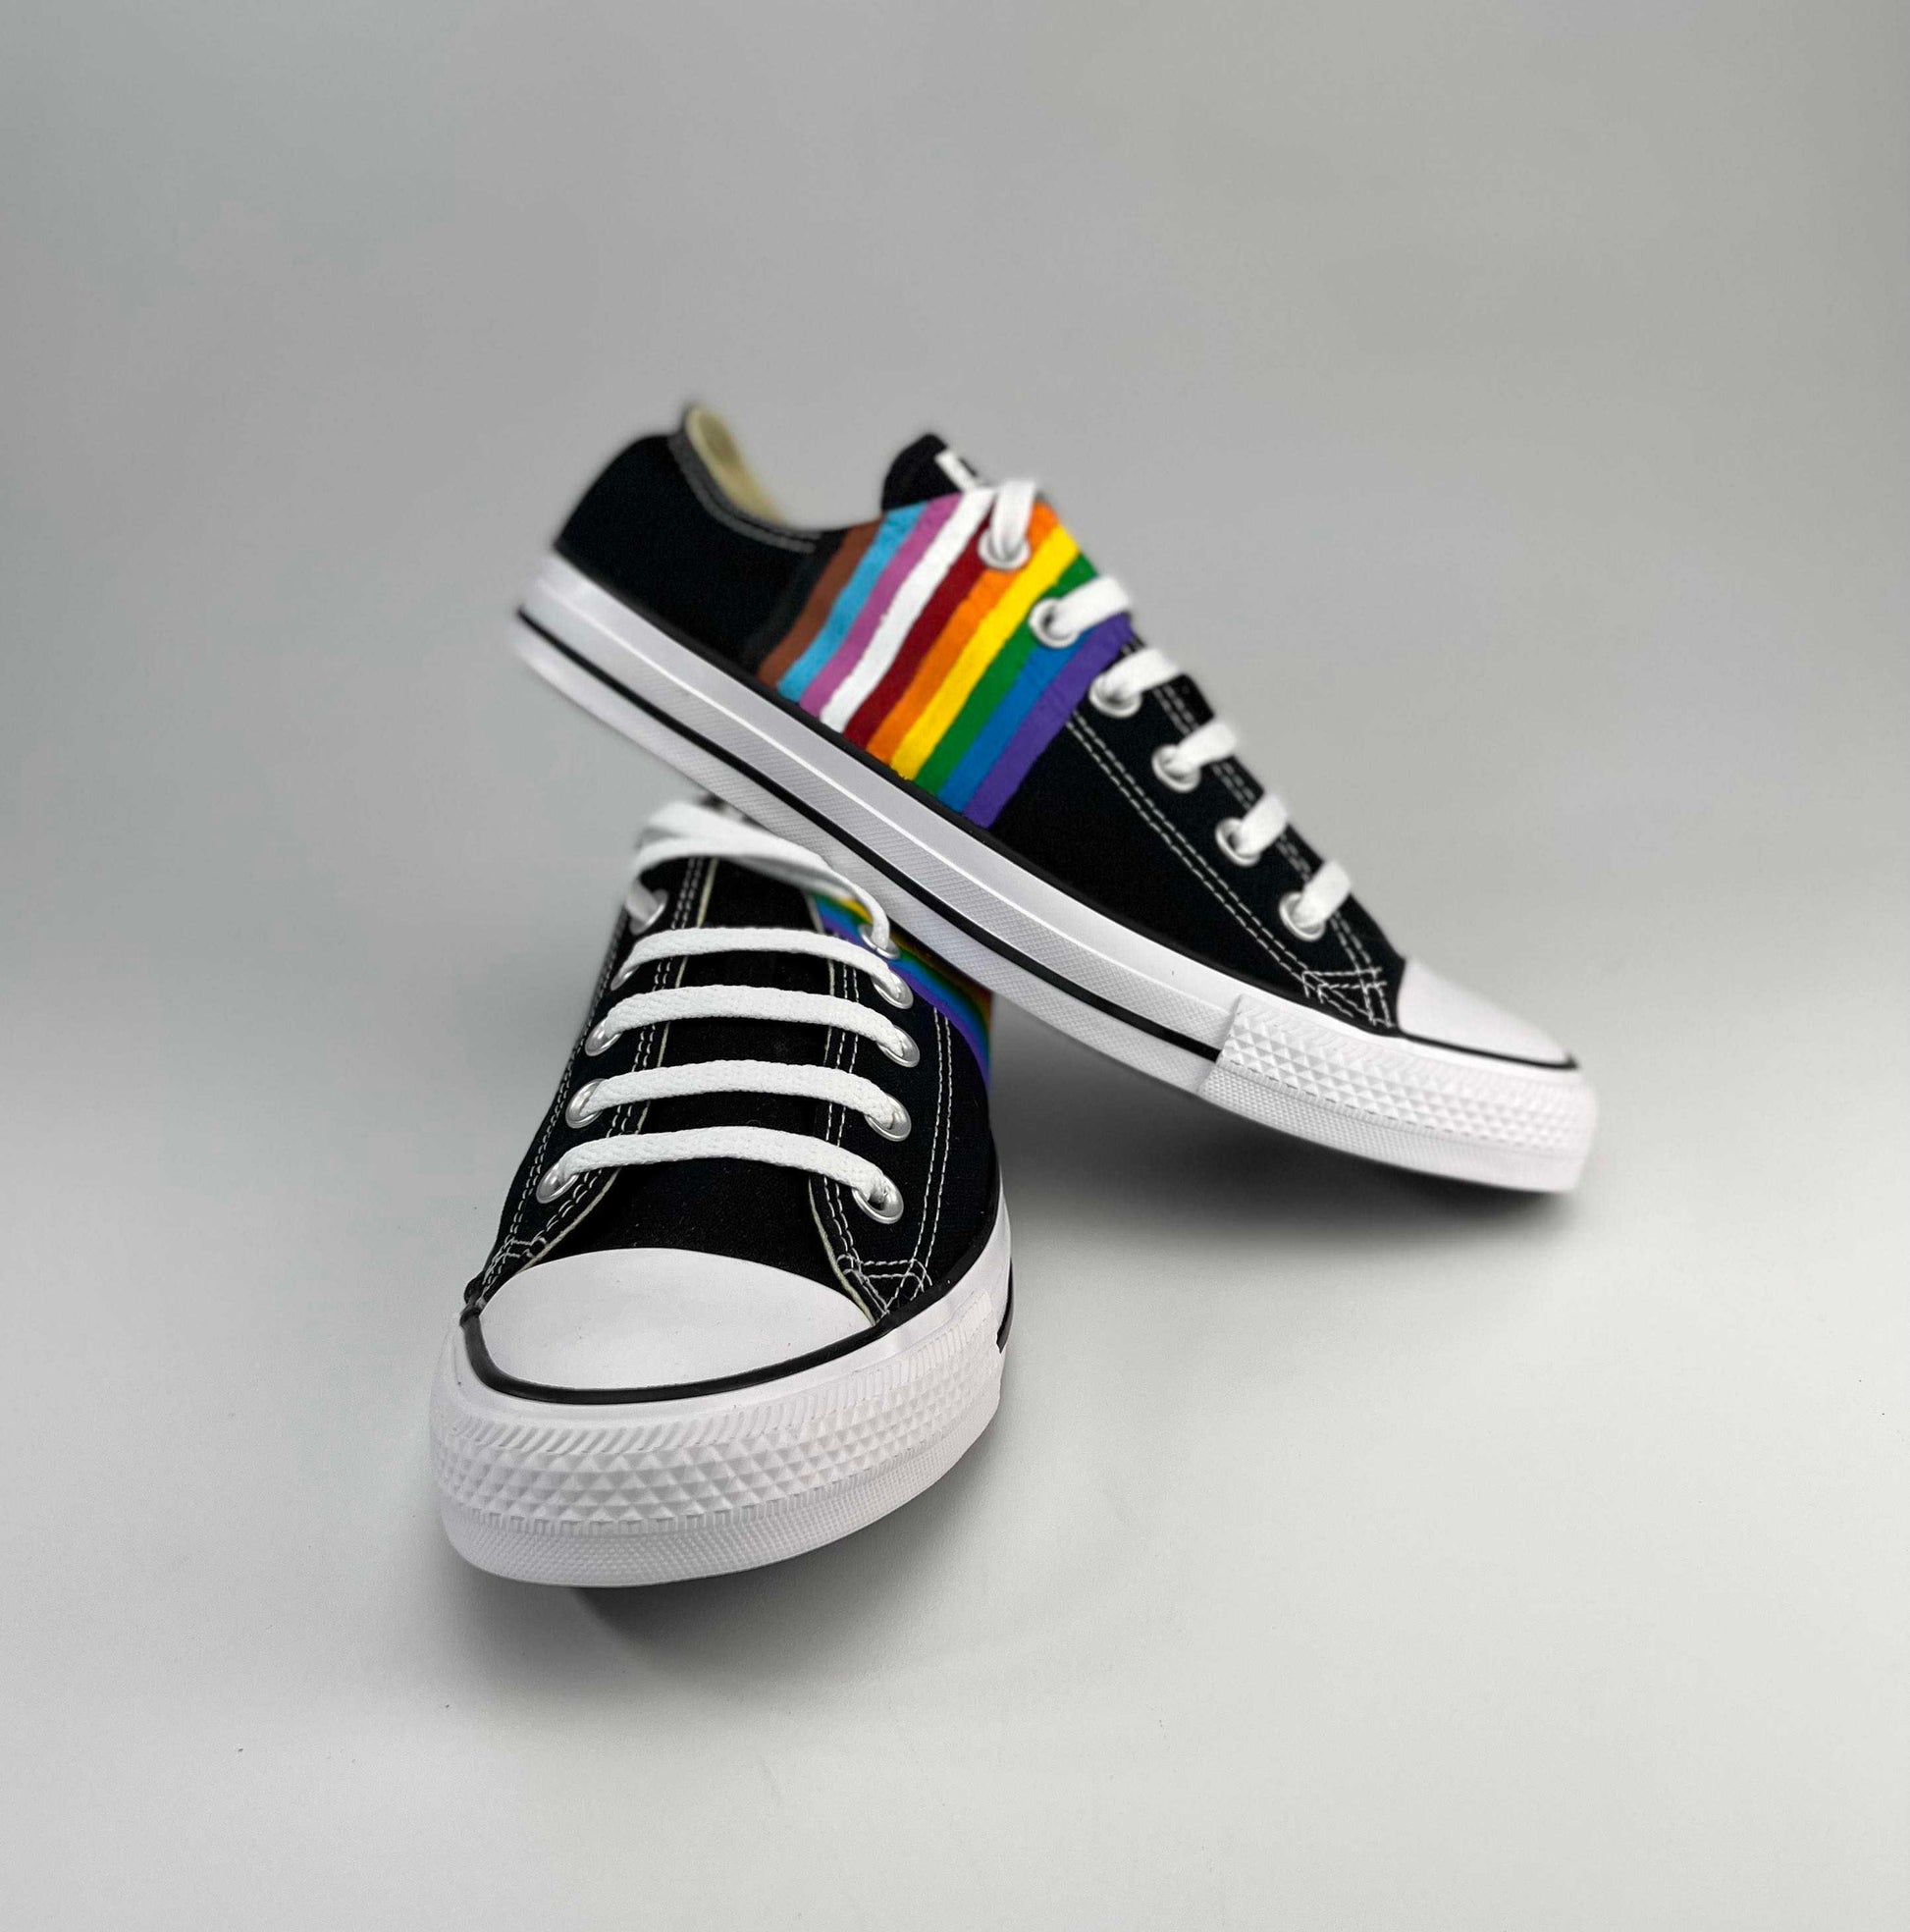 New Flag Pride Striped Sneakers